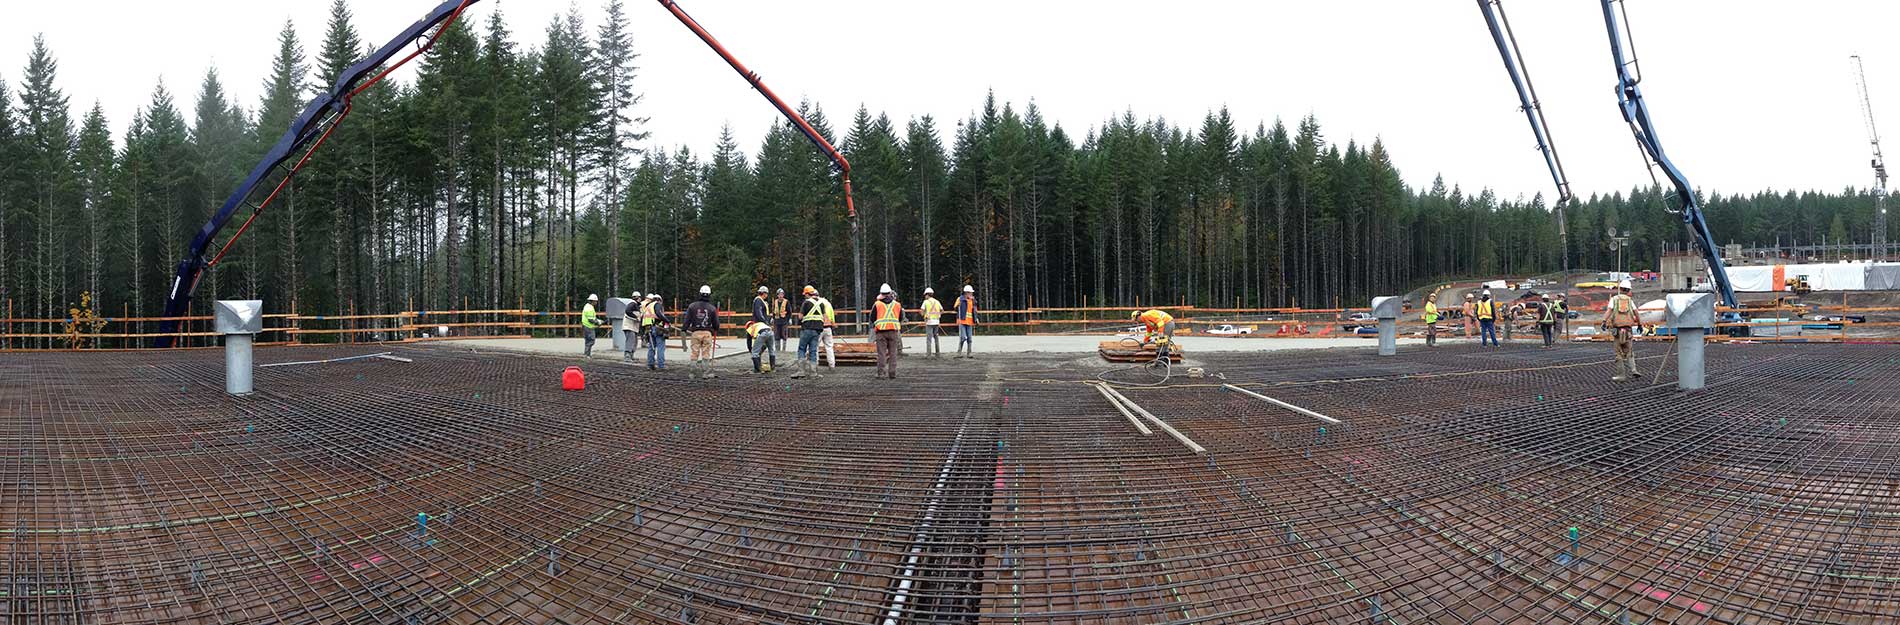 Large construction site with workers